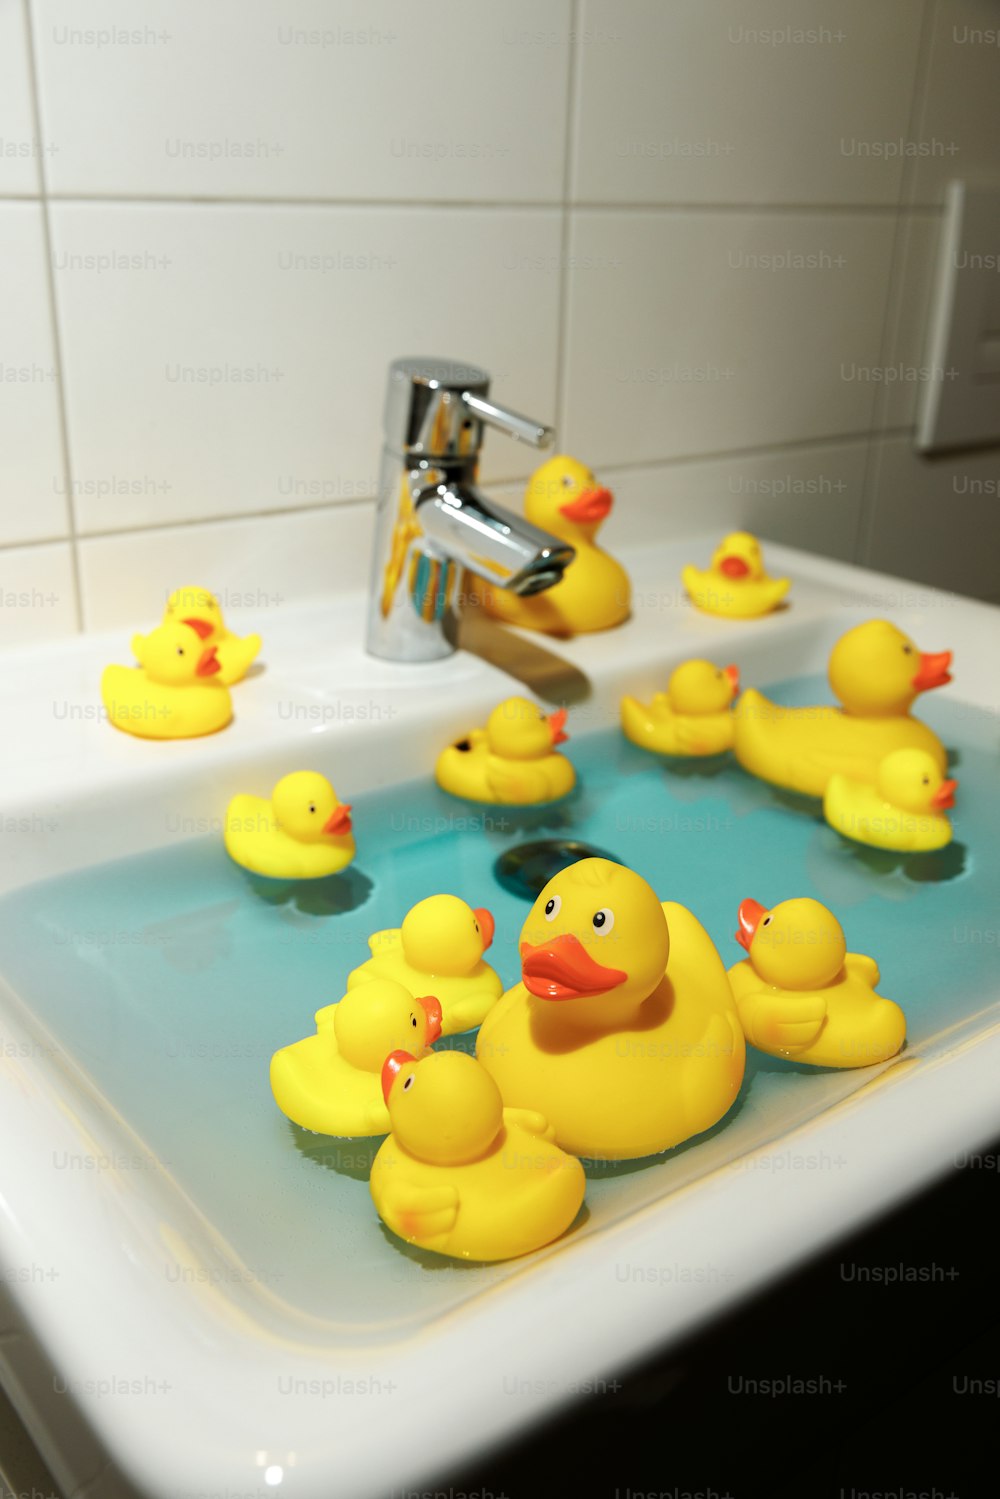 a group of yellow rubber ducks in a sink